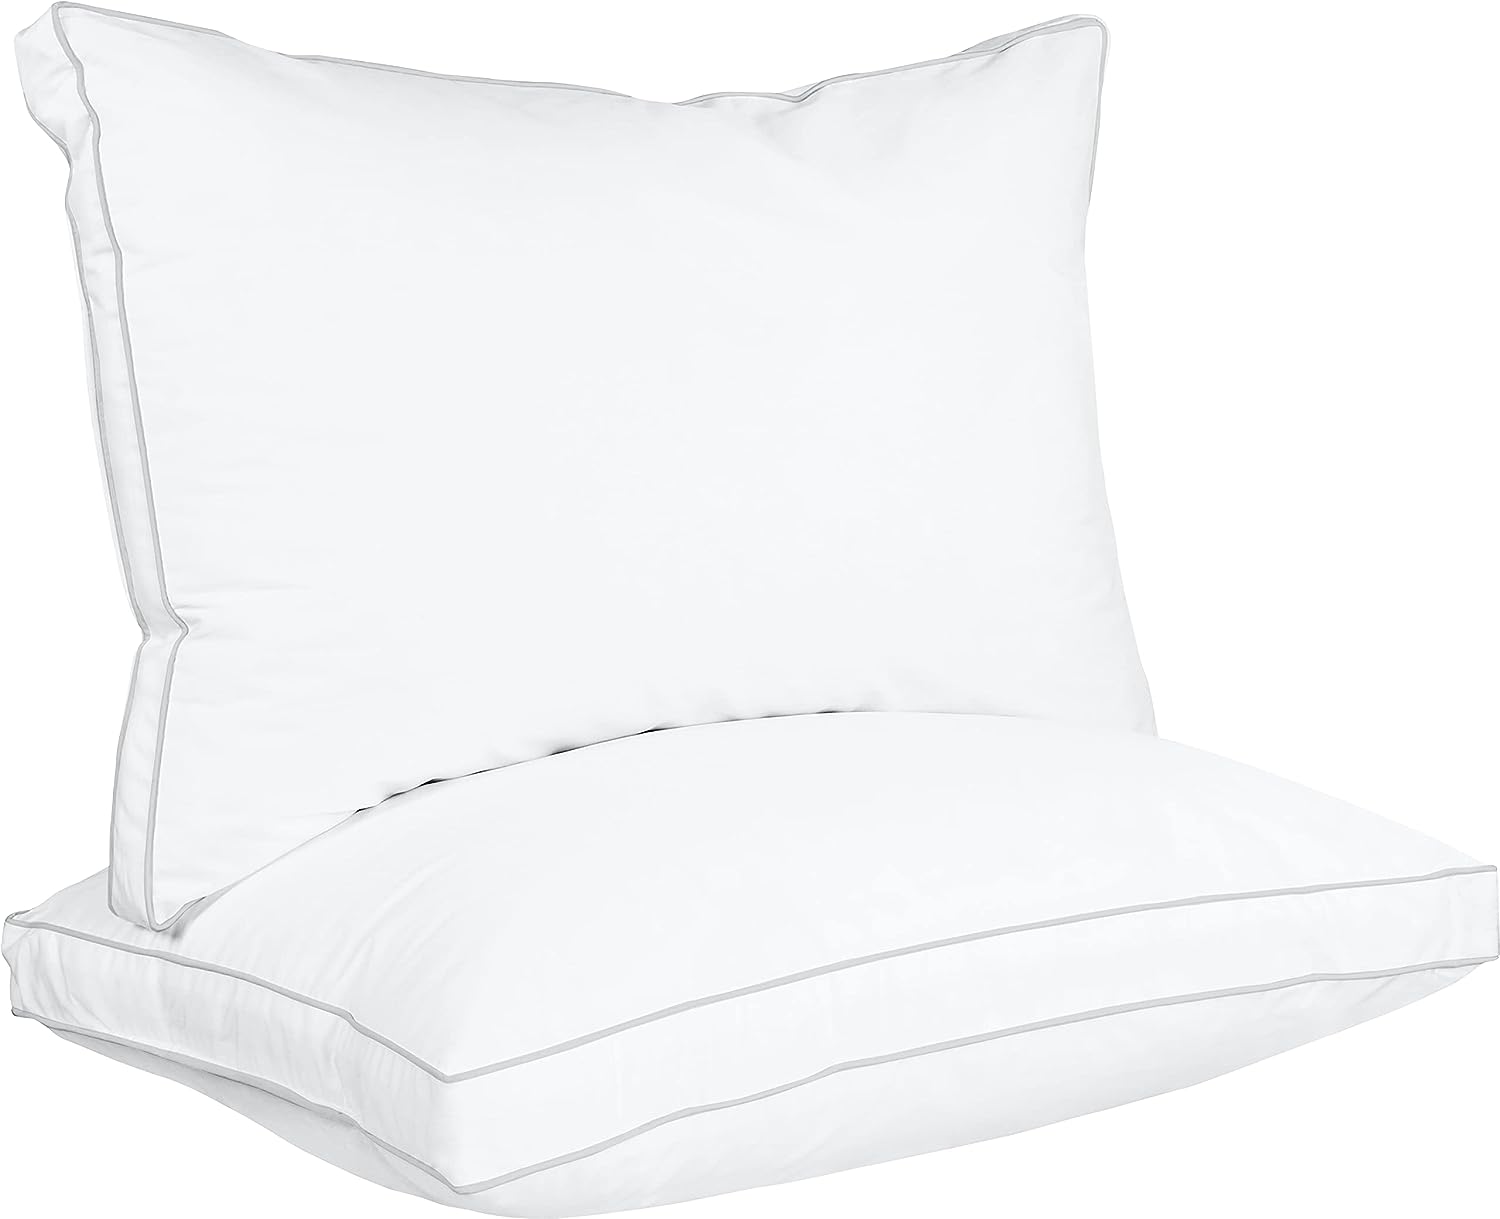 Utopia Bedding UB1535 Pillow Review - Consumer Reports